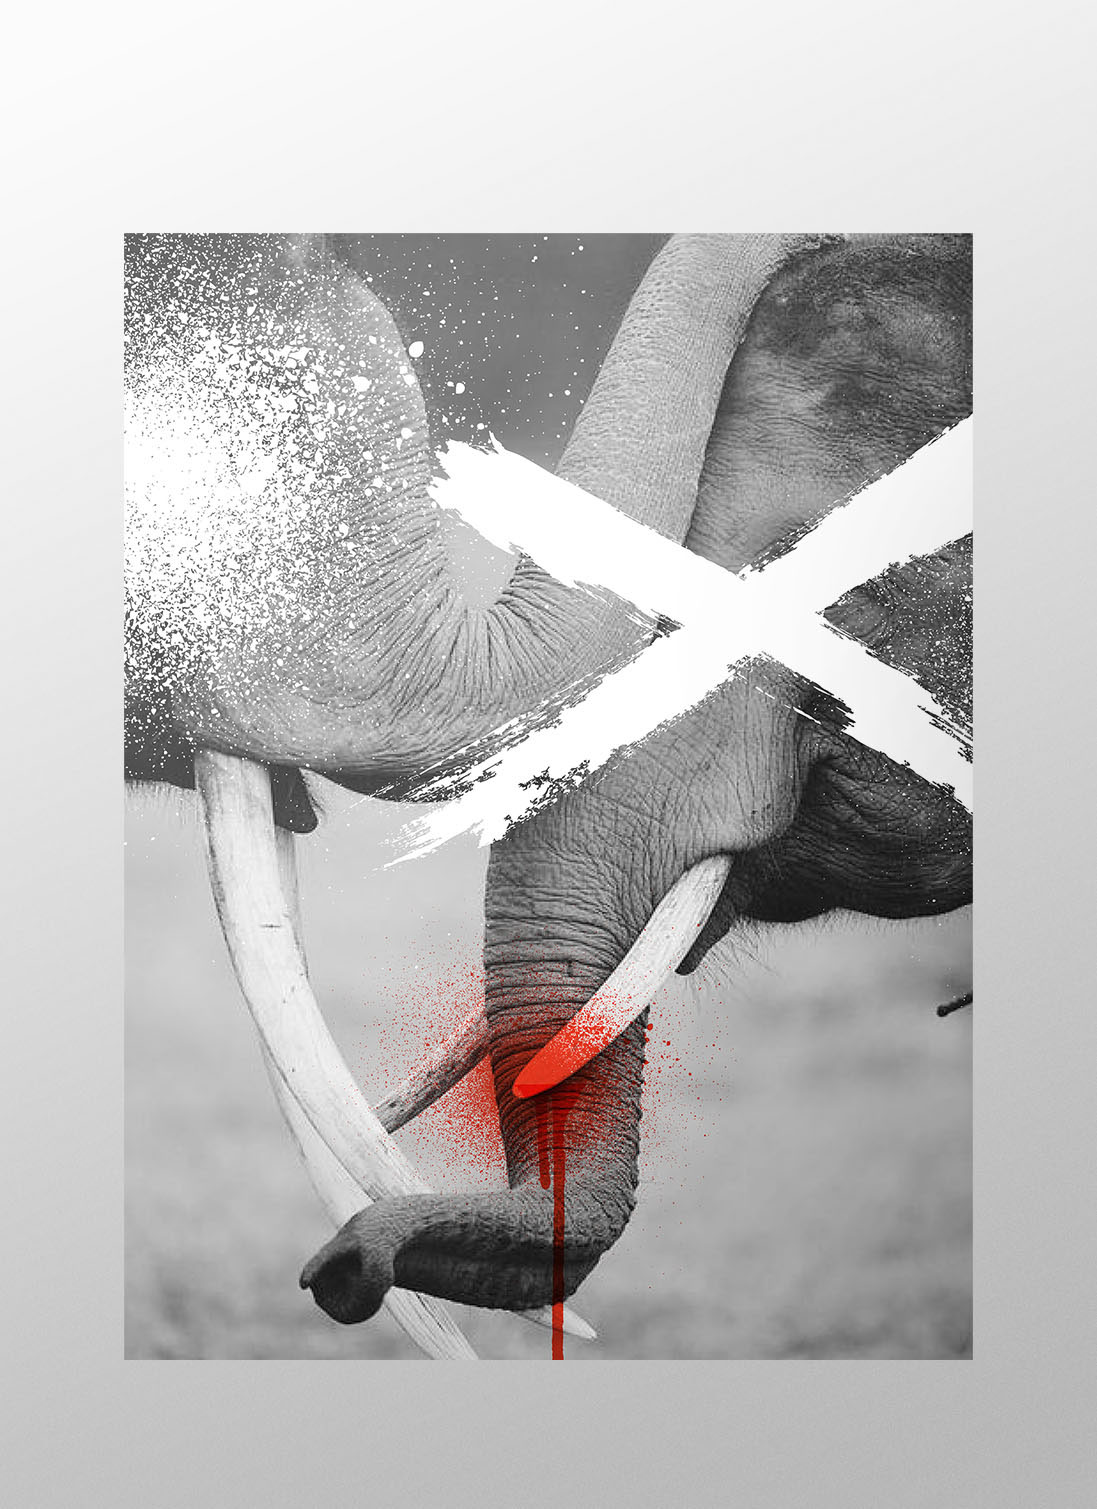 infographic elephant ivory installation poaching spraypaint vector mfa campaign advertisement shocking conceptual